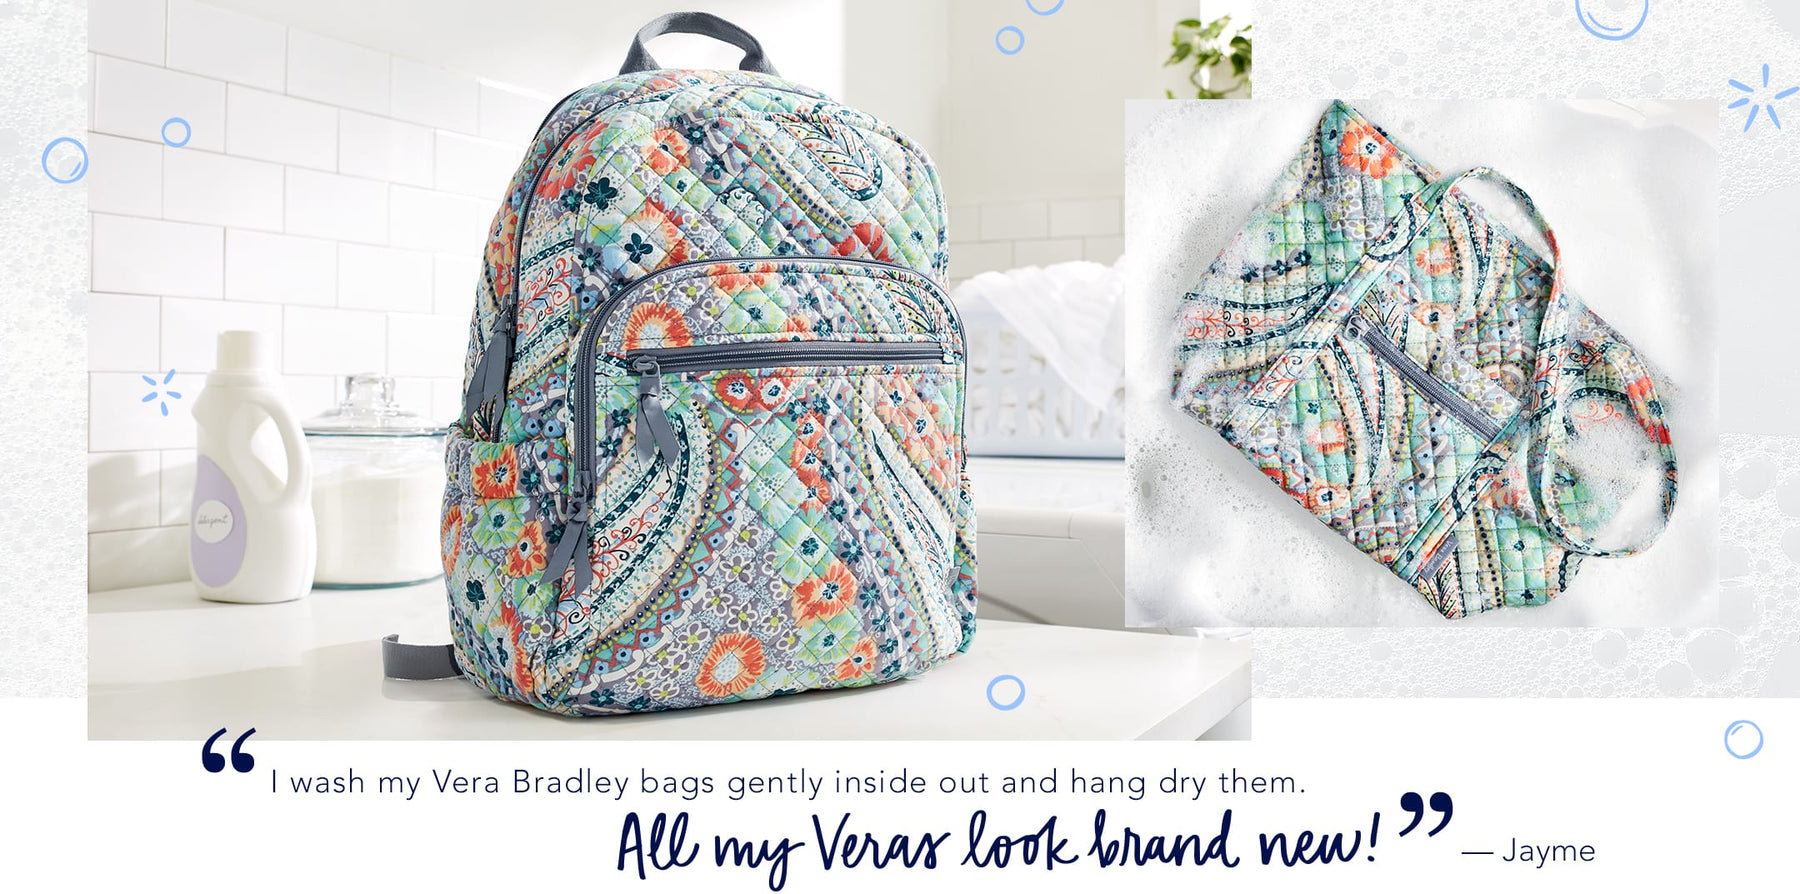 I wash my Vera Bradley bags gently inside out and hang dry them. All my Veras look brand new!